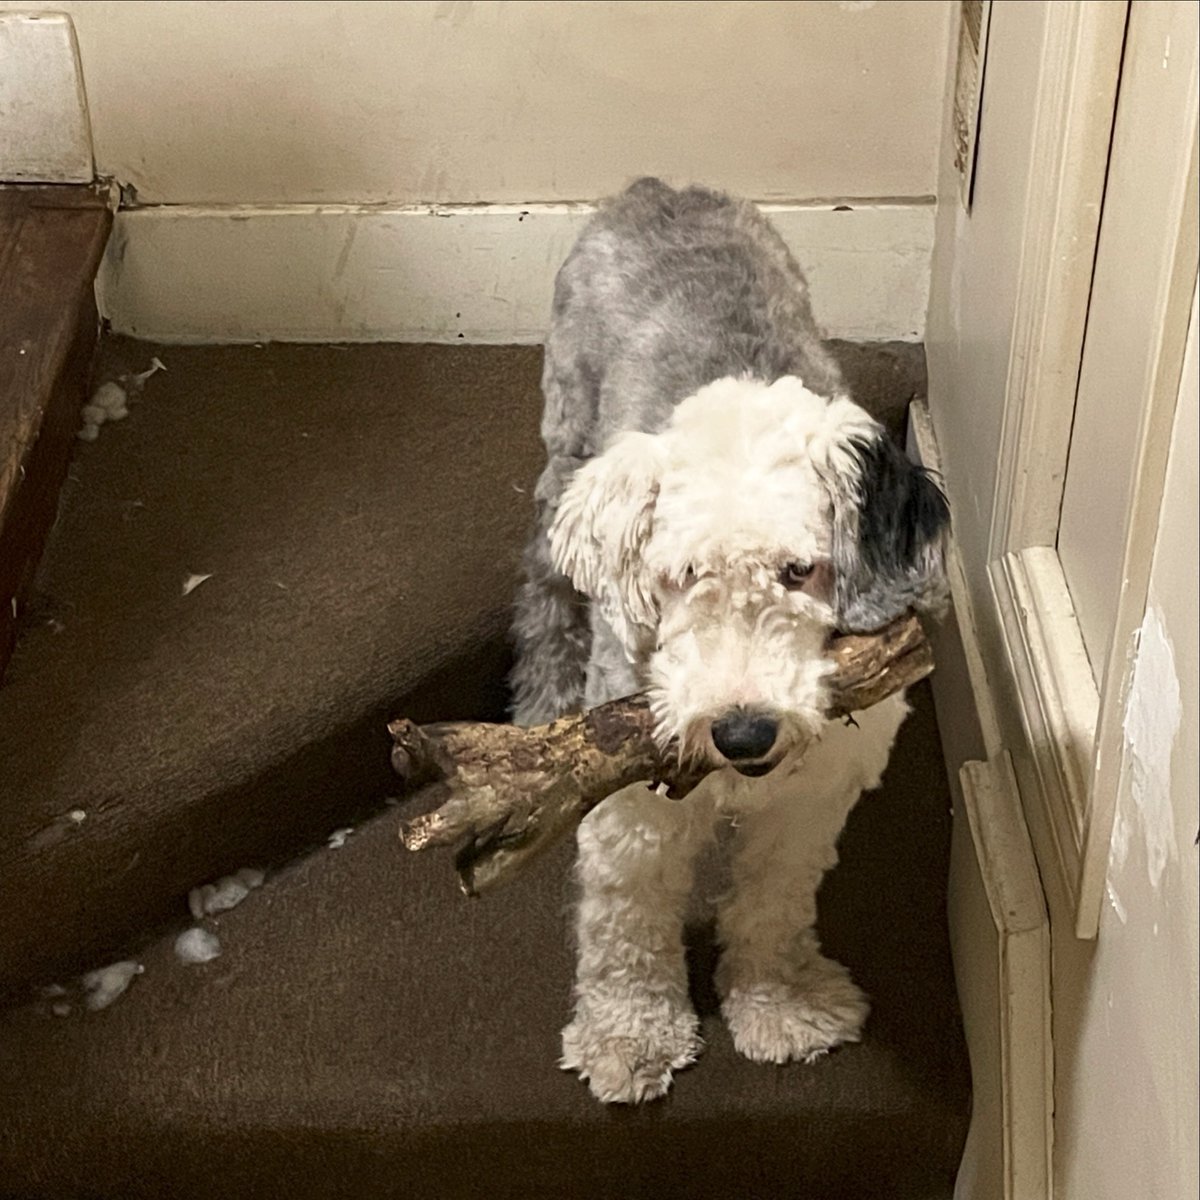 Cosmo brought in a um, large stick?  I started laughing and headed to the stairs, probably thinking I would take it away.  Nah, you earned it bud.😆

#oes #oldenglishsheepdog #sheepdog #cosmothebear